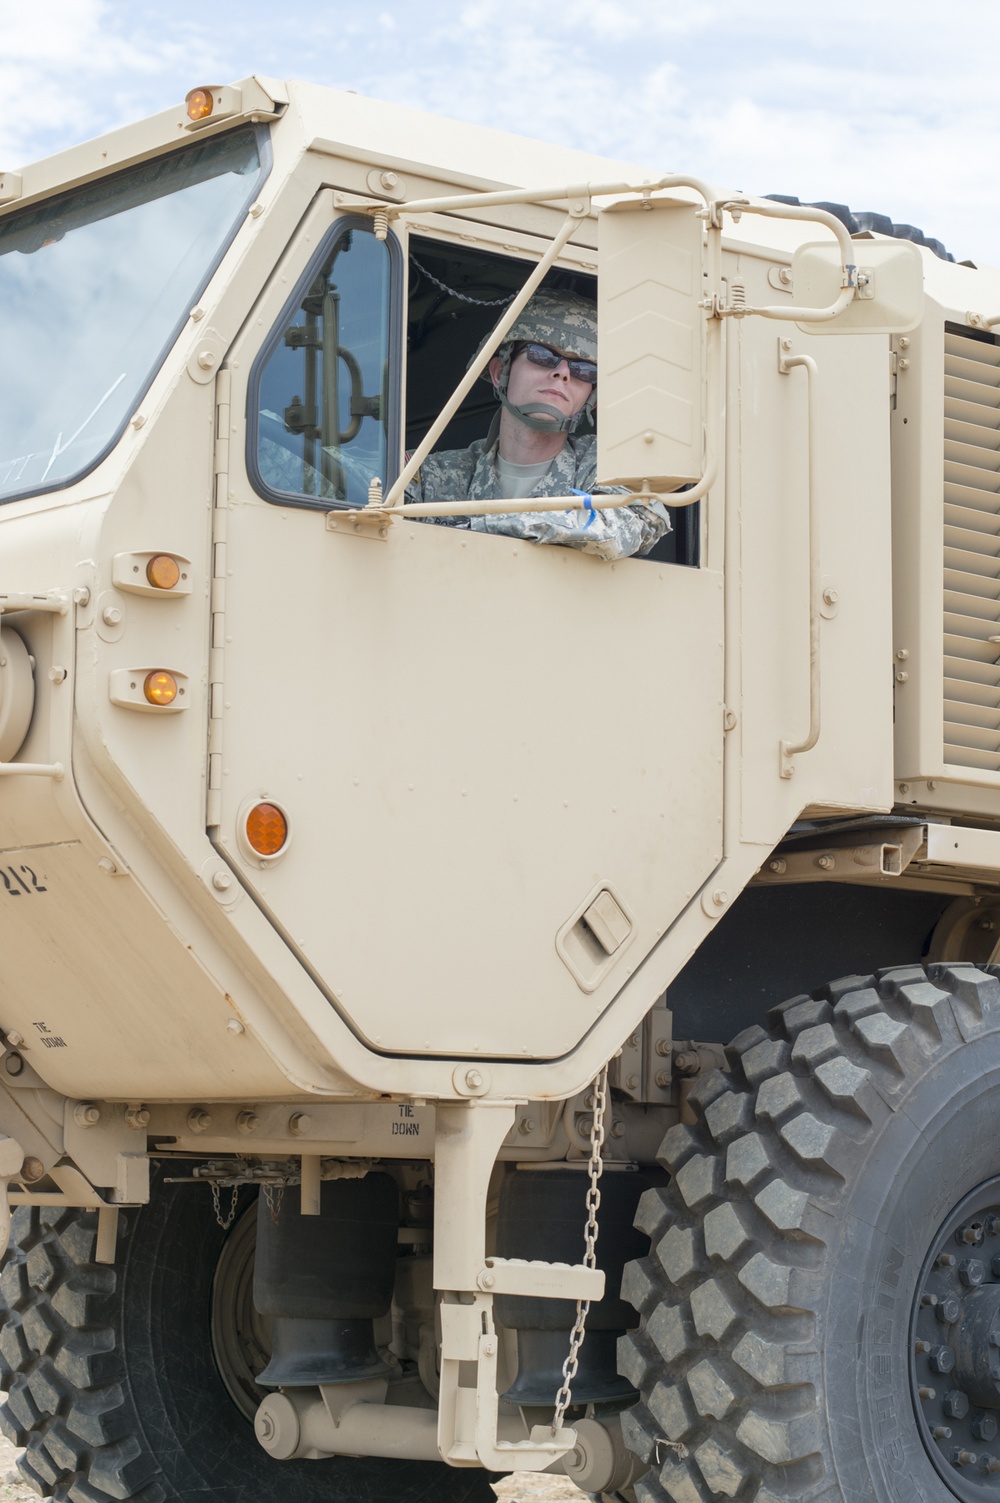 Oklahoma Guardsmen provide engineering services and backup hurricane relief